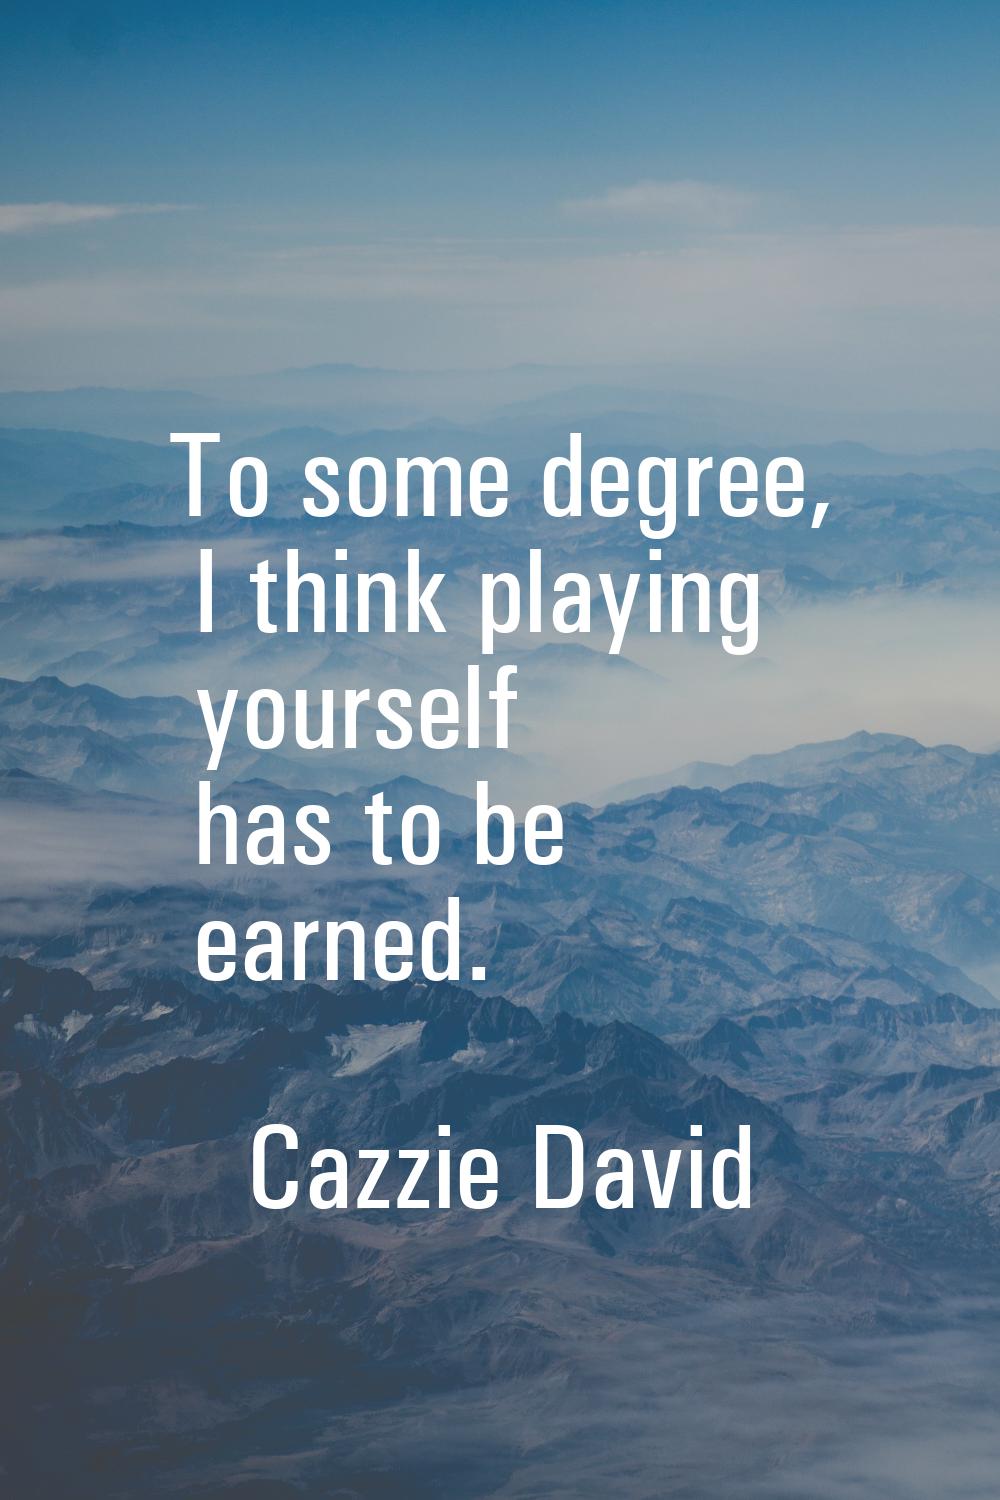 To some degree, I think playing yourself has to be earned.